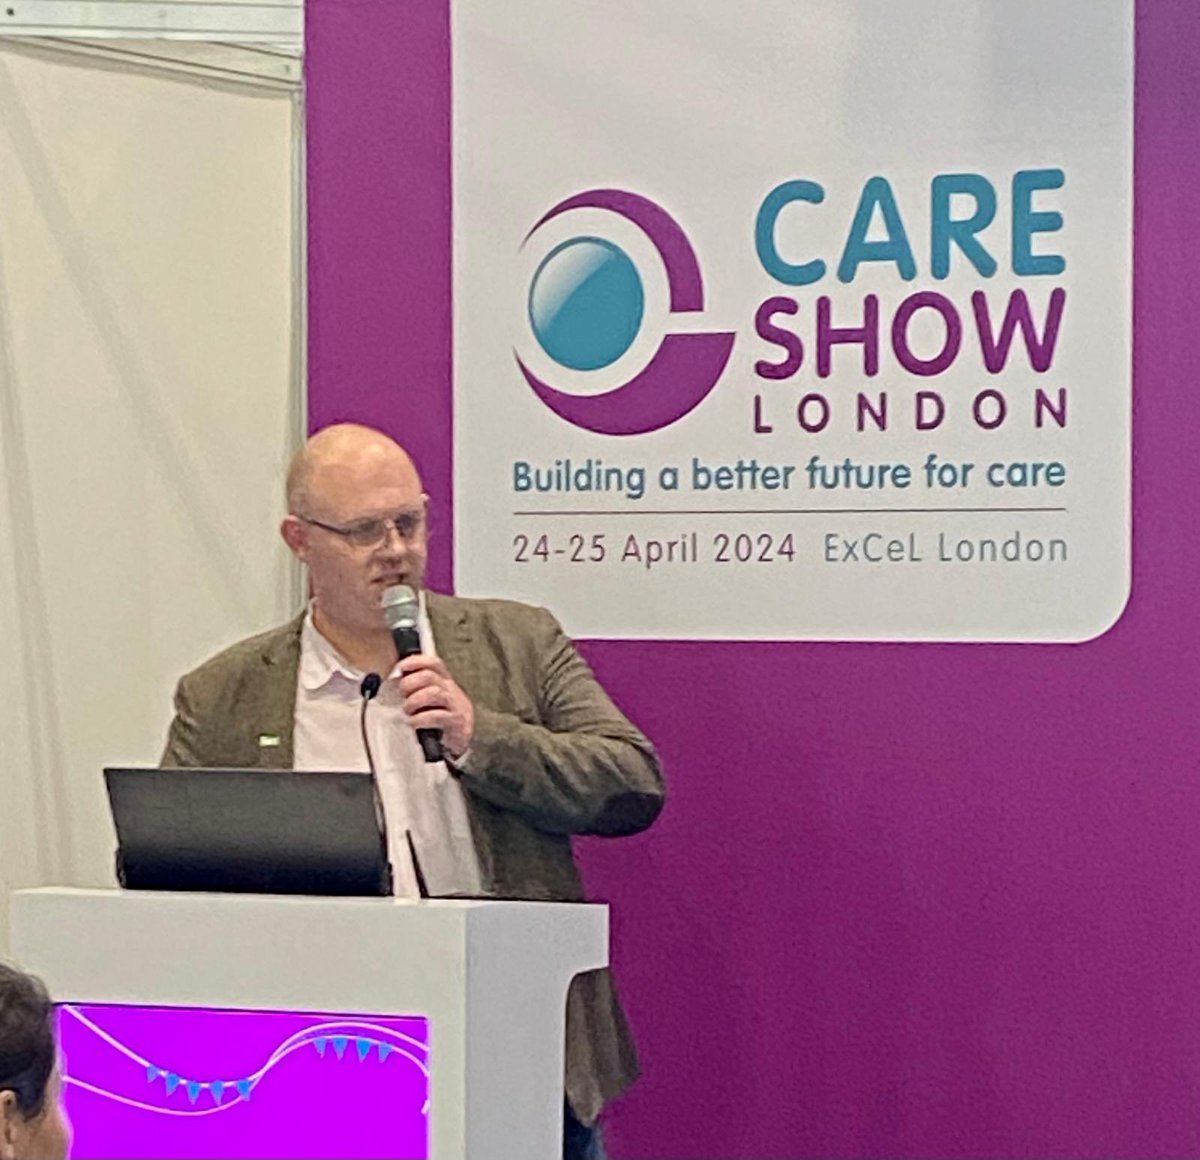 Our colleague Nick Goodall opened the Technology theatre on day 2 of #CareShowLDN24, sharing insights into the work taking place to drive better integration between health and social care systems through digital . We’re on stand H15, come and say hello 💚 digitisingsocialcare.co.uk